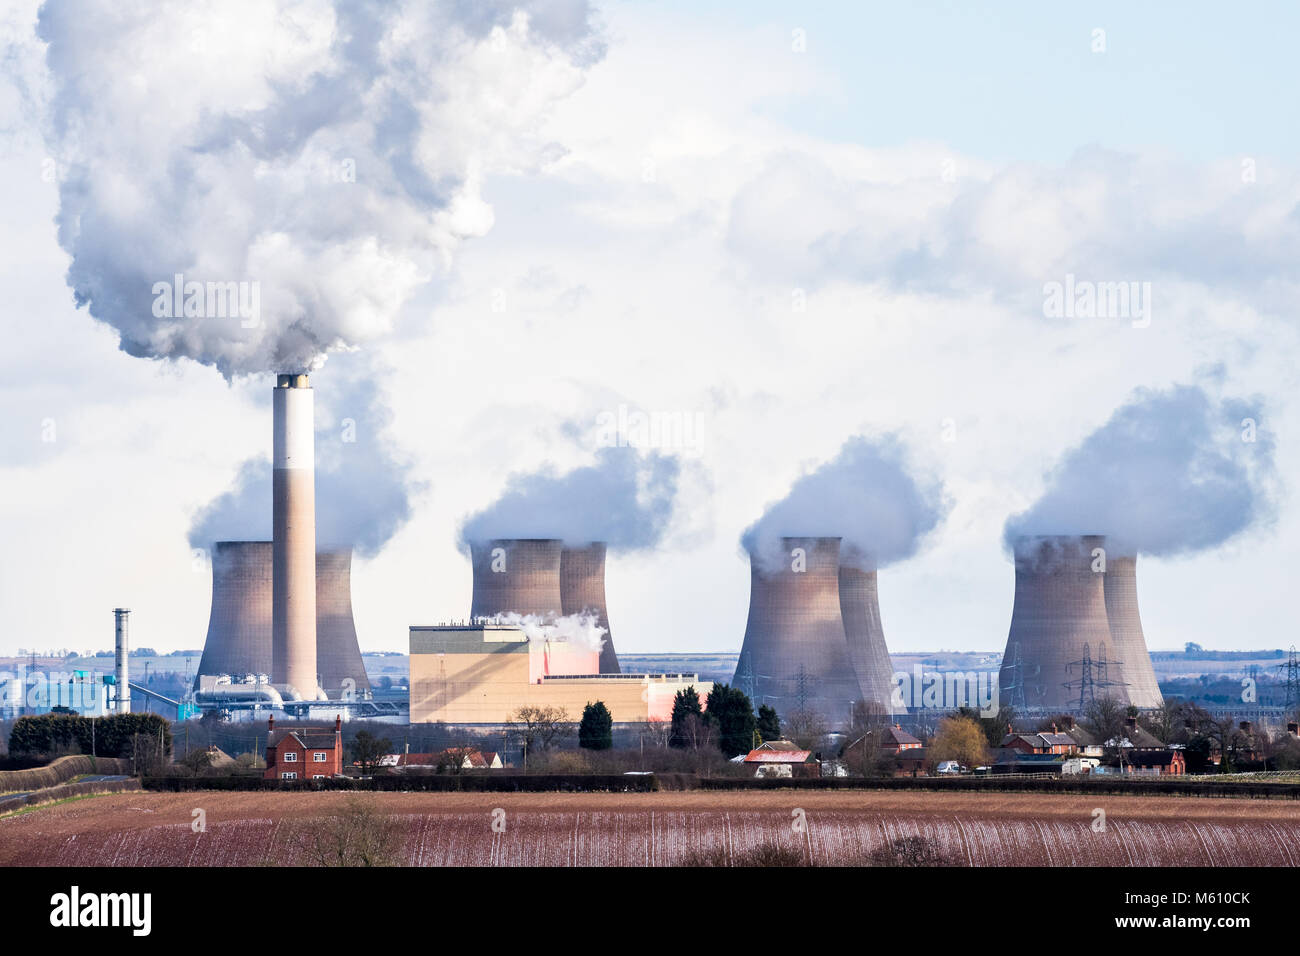 Cottam, Retford, Nottinghamshire, UK. 27th. February 2018. Cottam coal fired power station in Nottinghamshire working at full capacity during the cold winter period made worst by the Beast from the East. Alan Beastall/Alamy Live News. Stock Photo